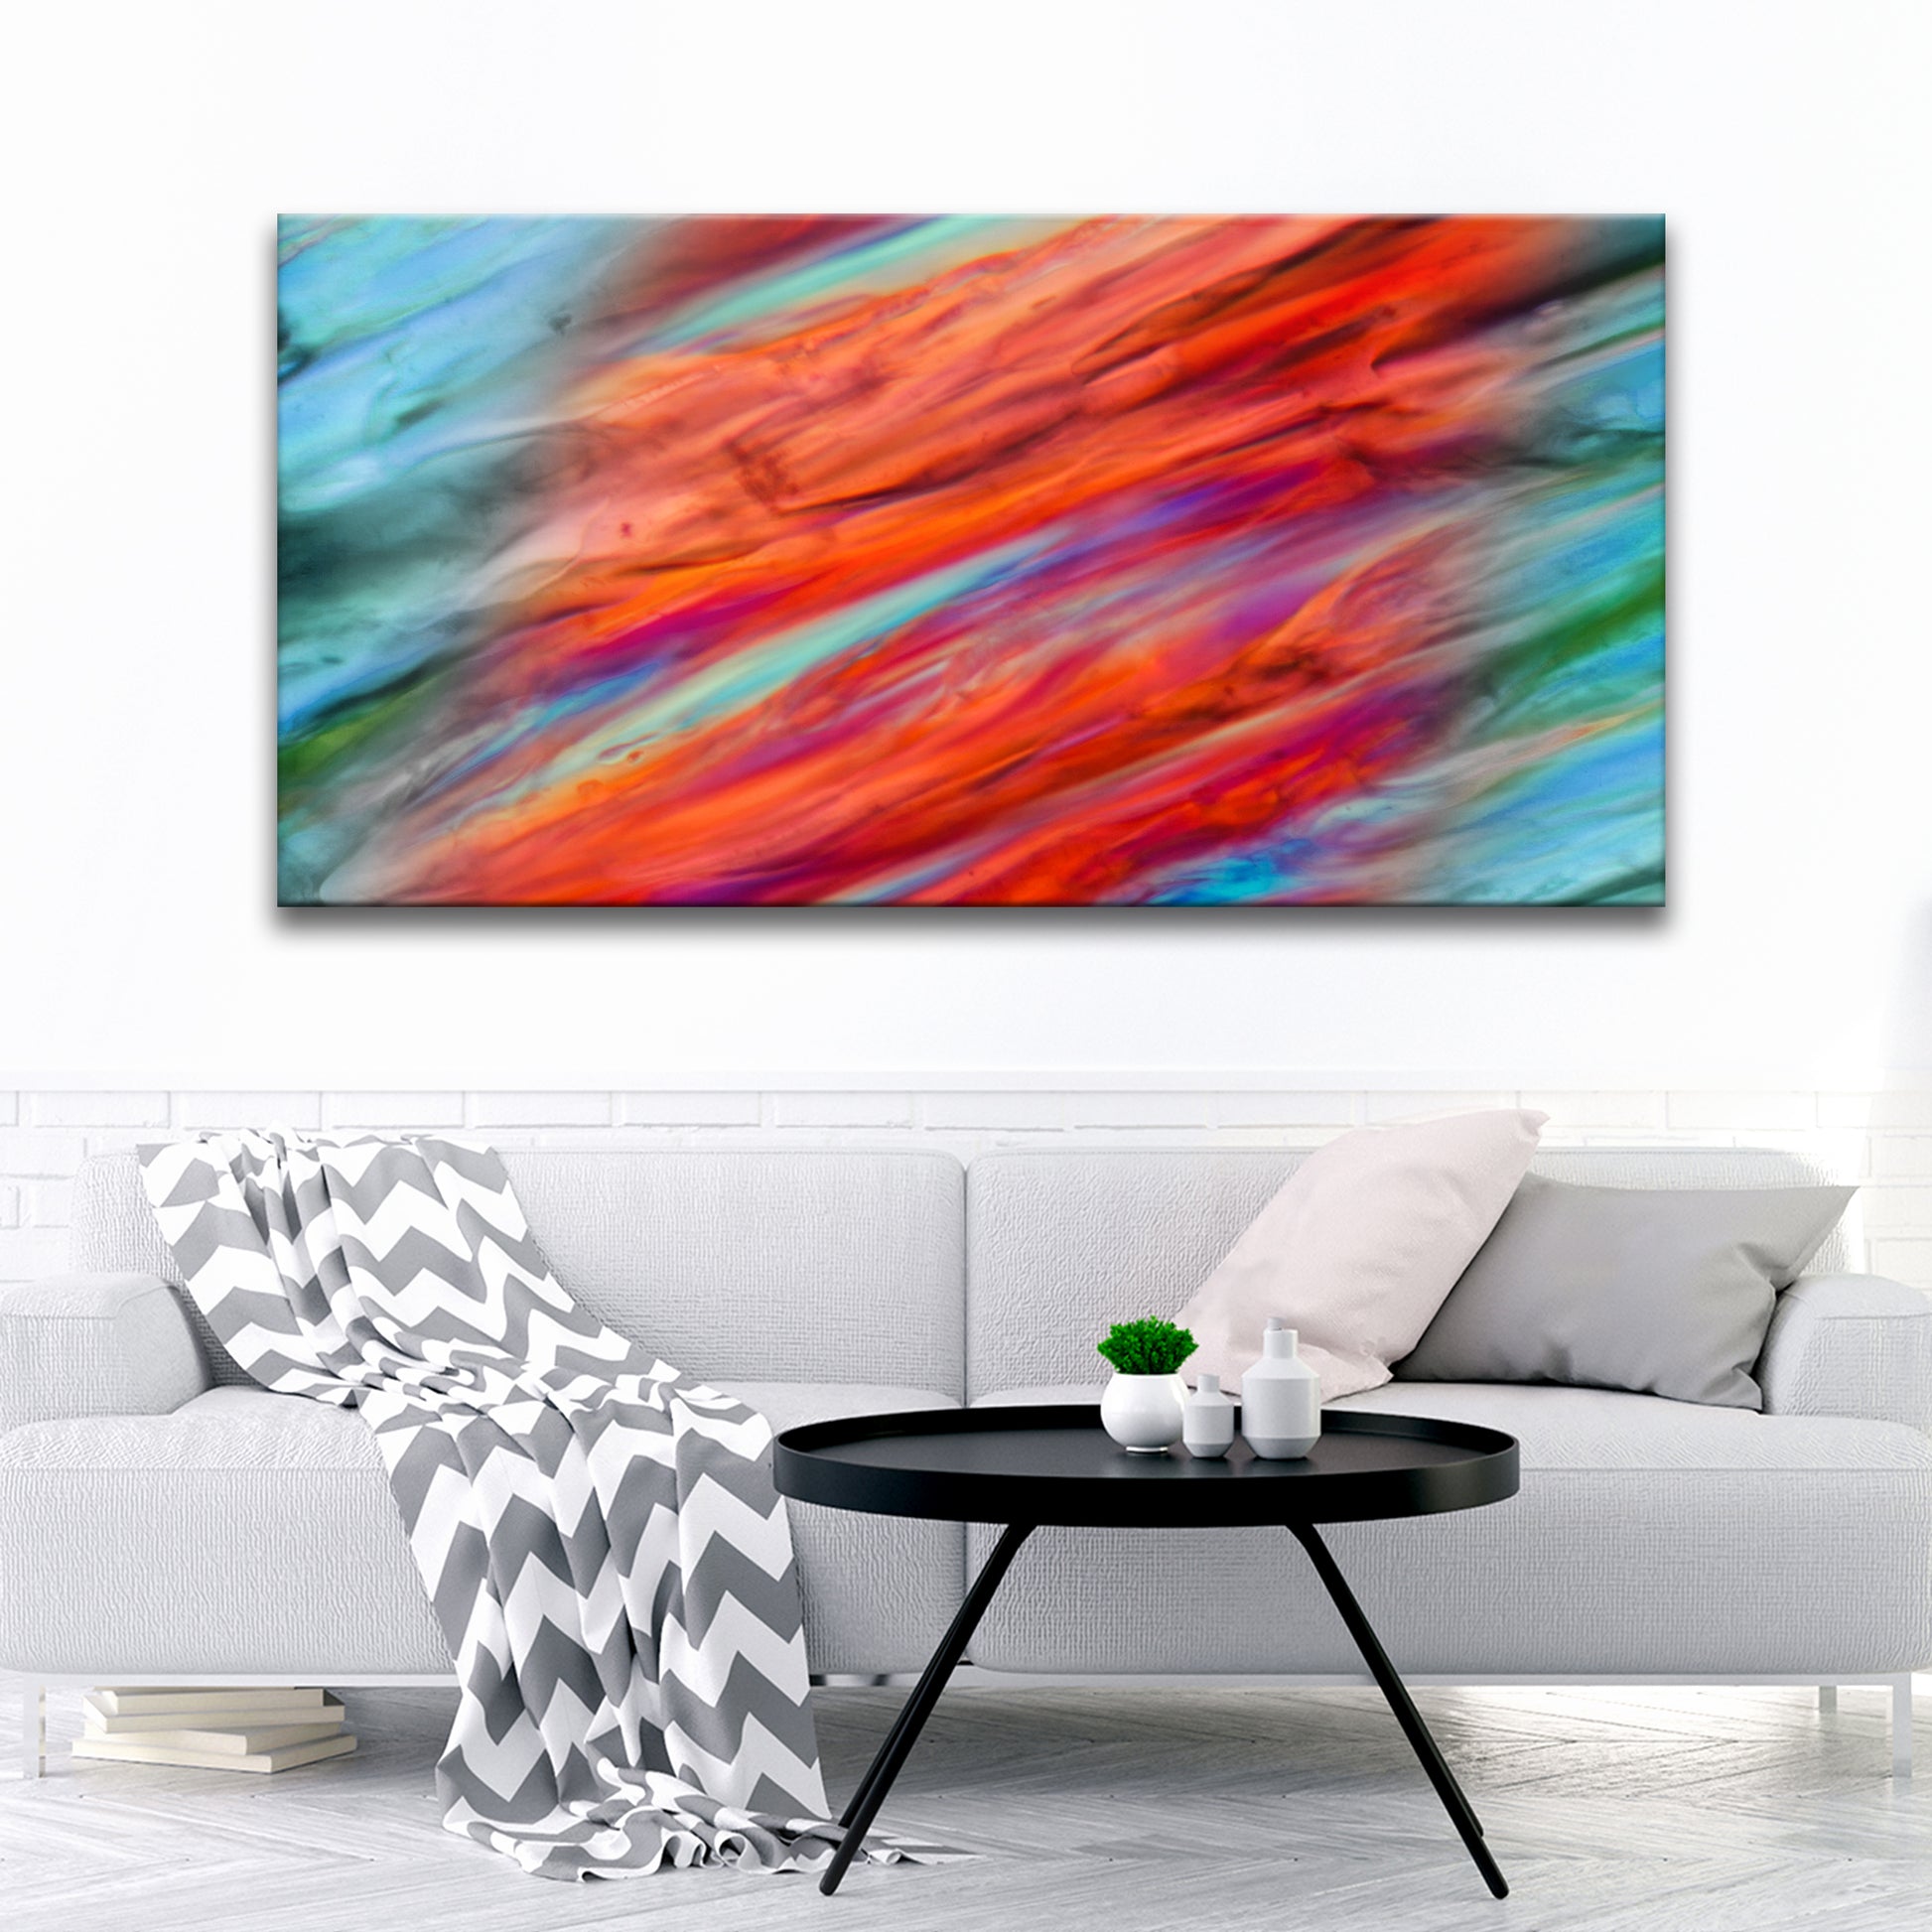 Teal And Orange Abstract Painting Canvas Wall Art Style 1 - Image by Tailored Canvases